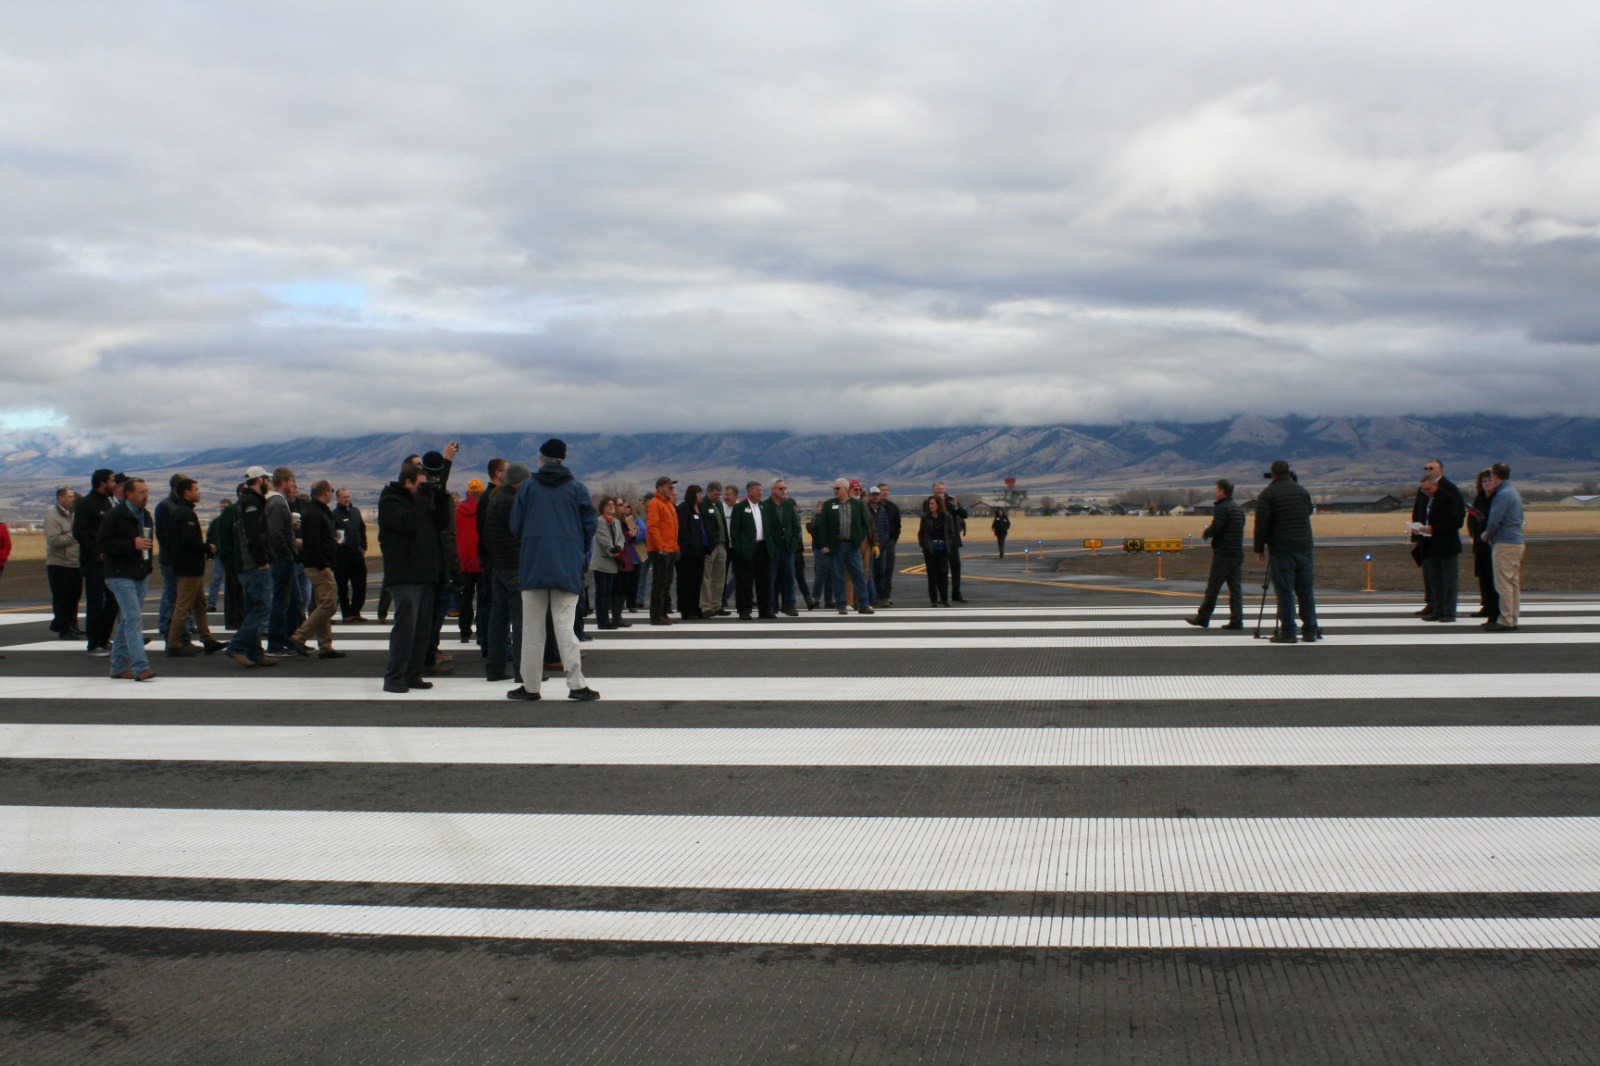 Attendees gather at the end of the runway for the opening ceremony on Oct. 26, 2017.